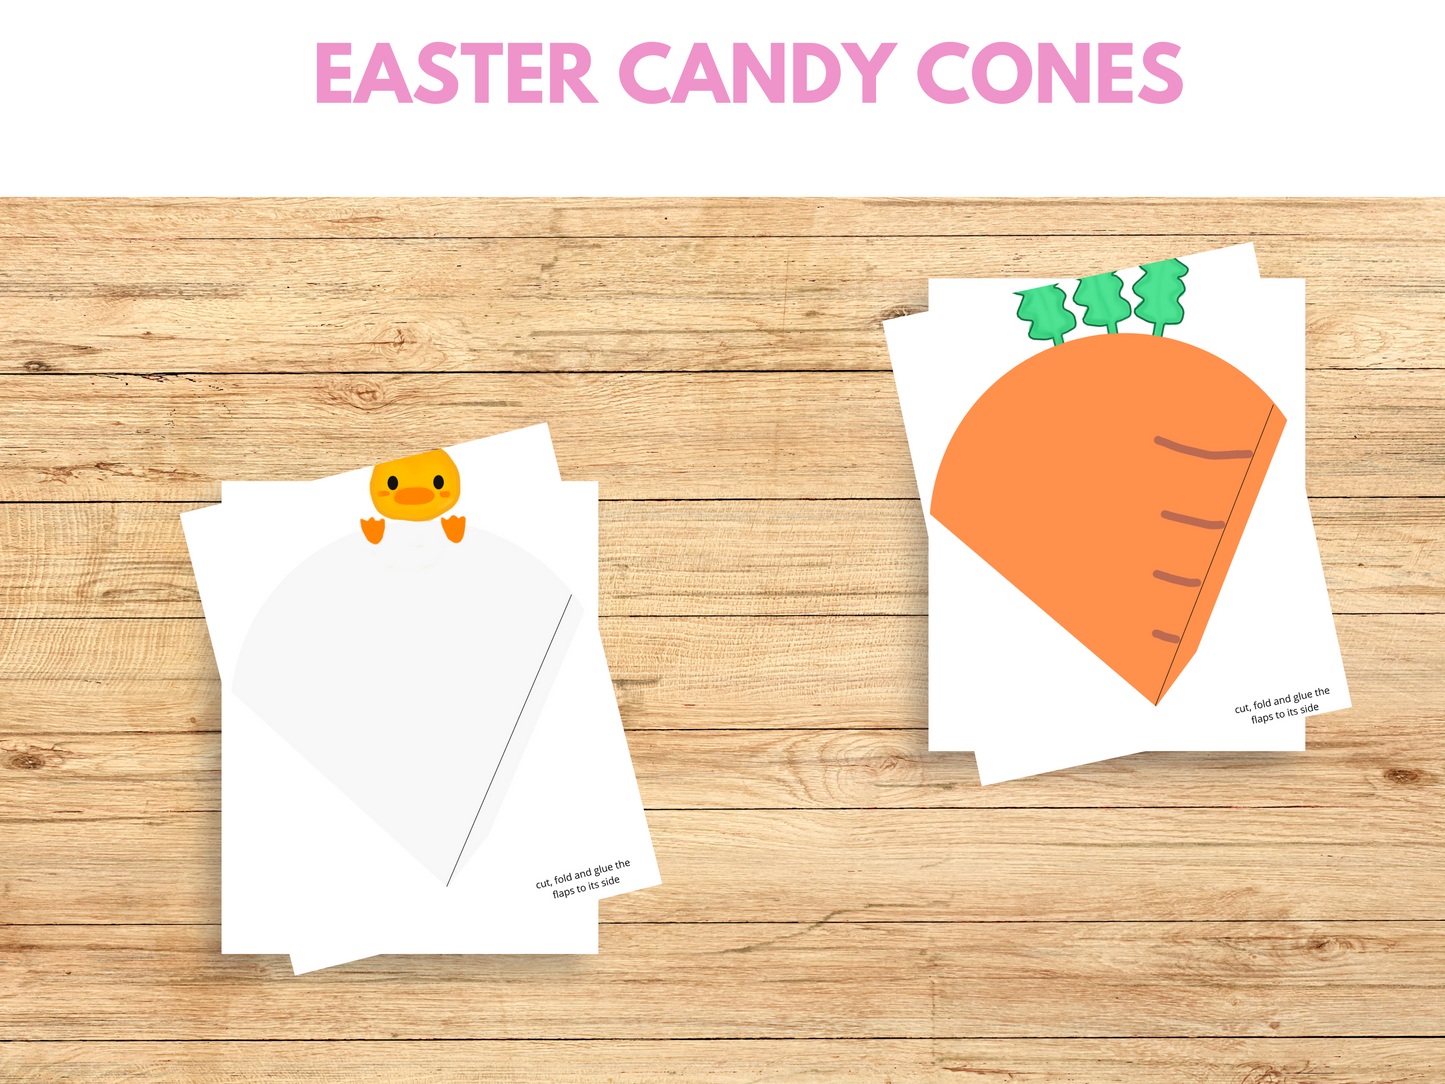 Two printable Easter candy cones white with  a yellow duck and  a orange carrot